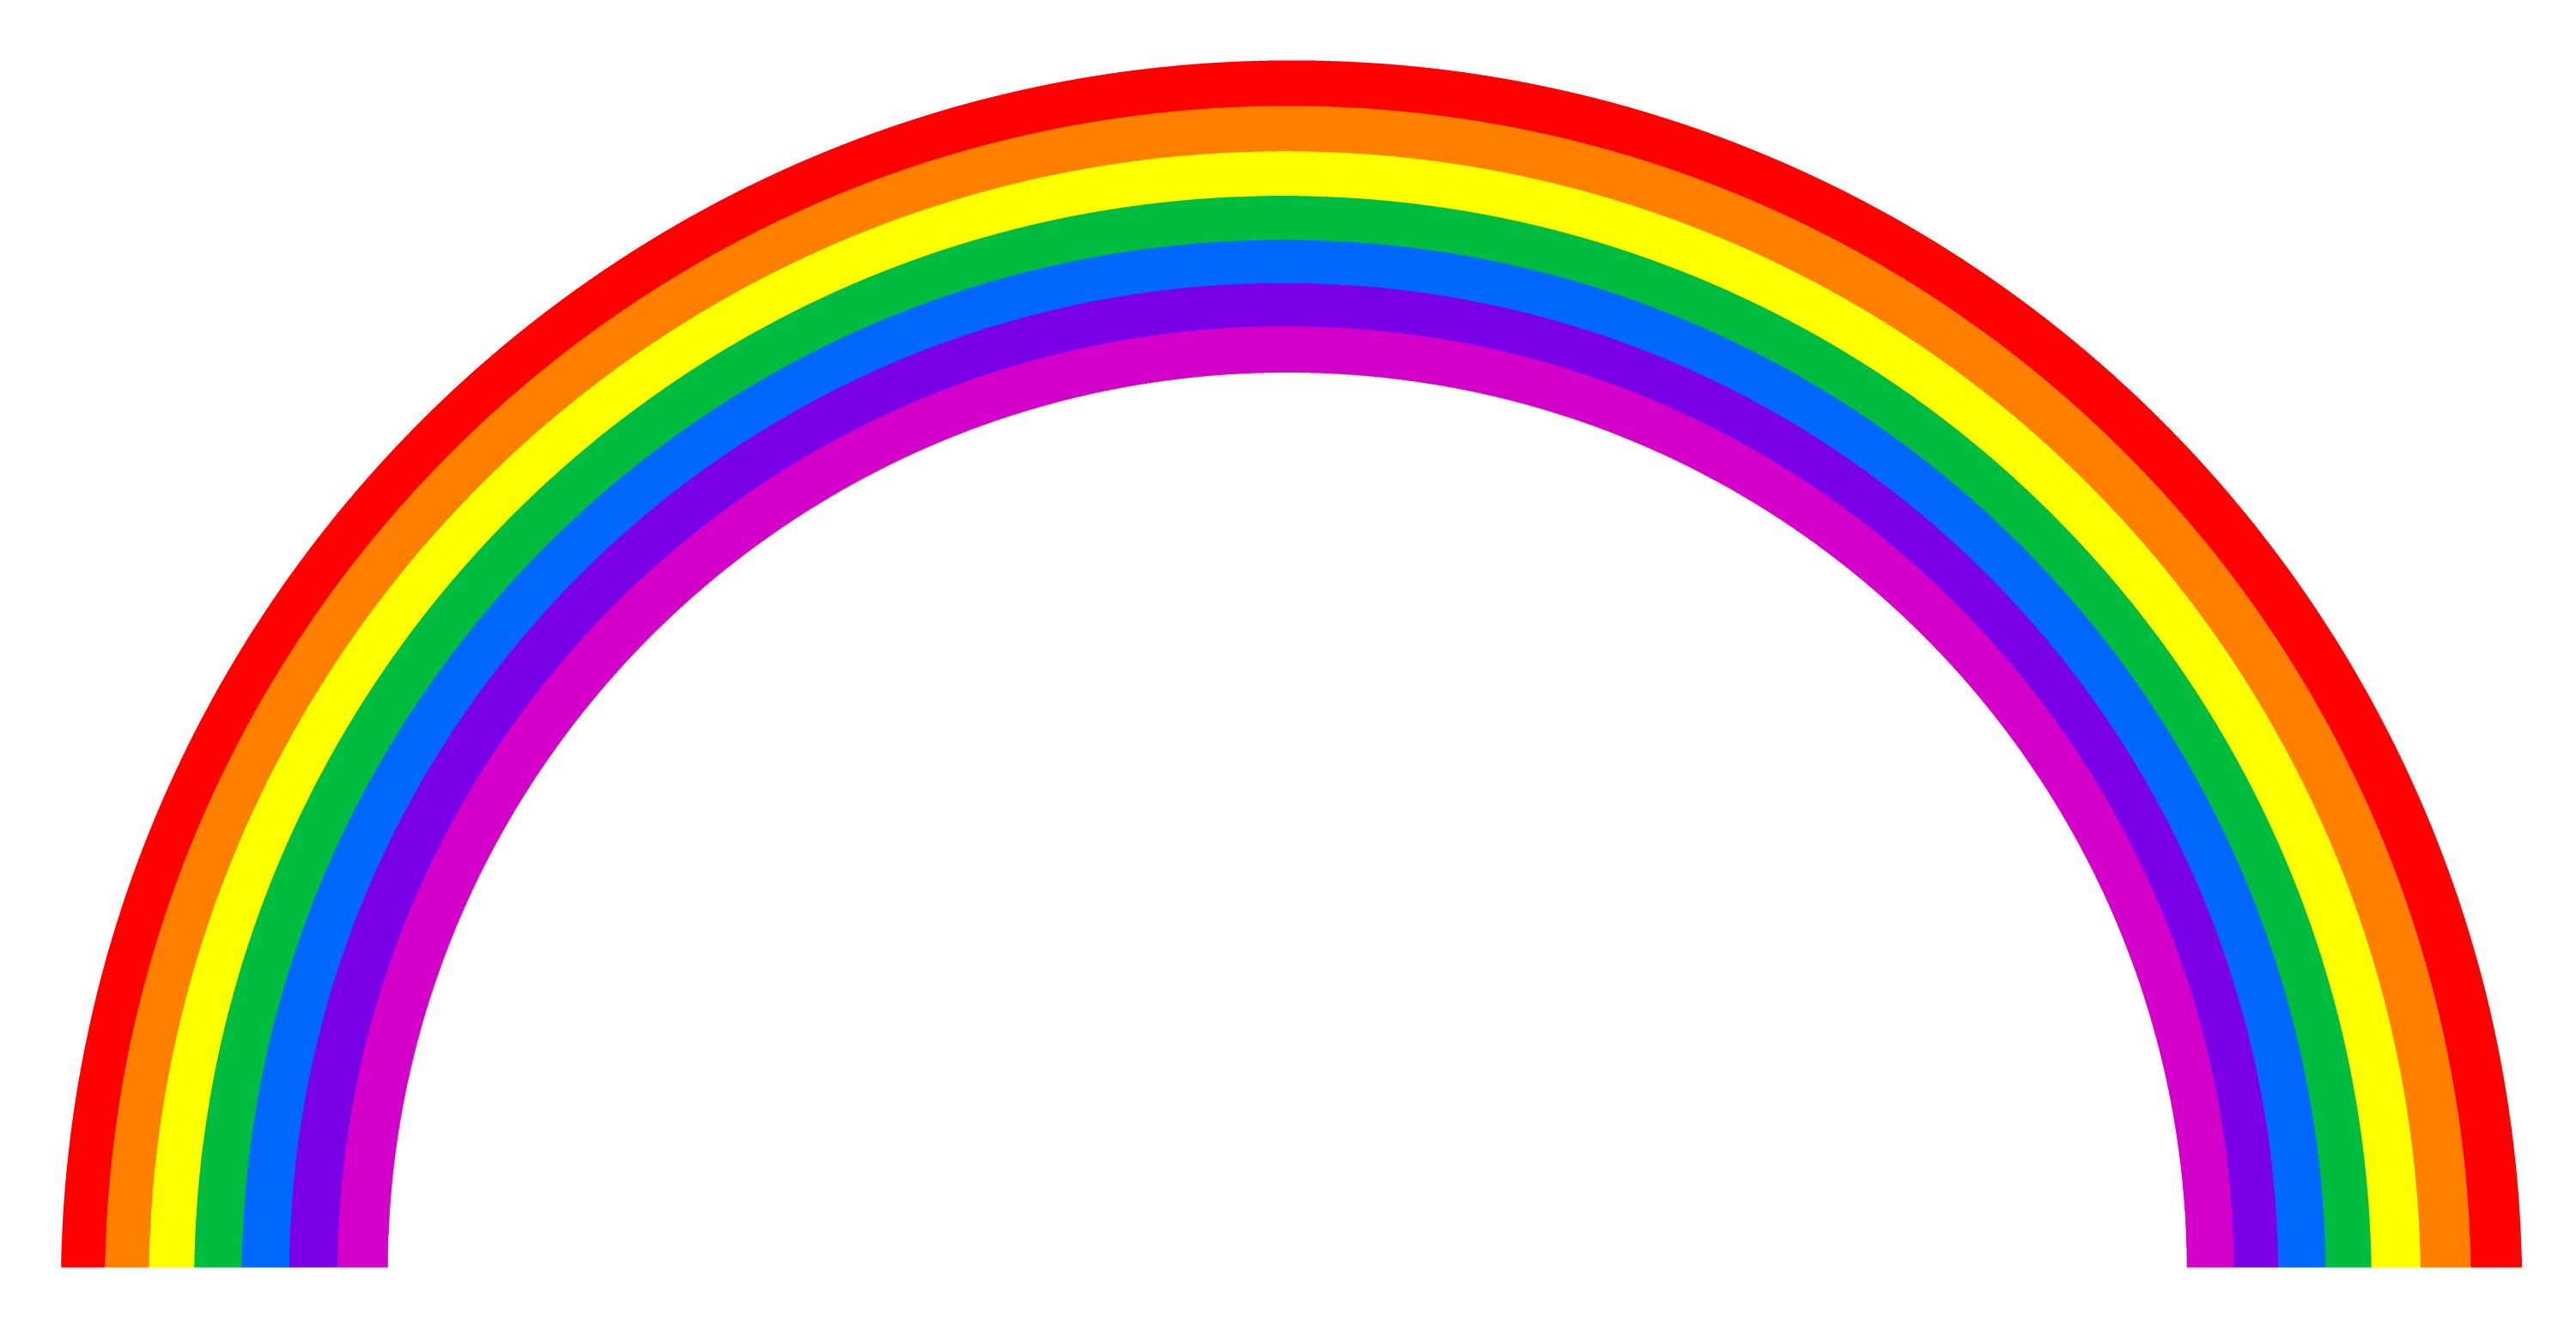 free clipart images rainbow - photo #20